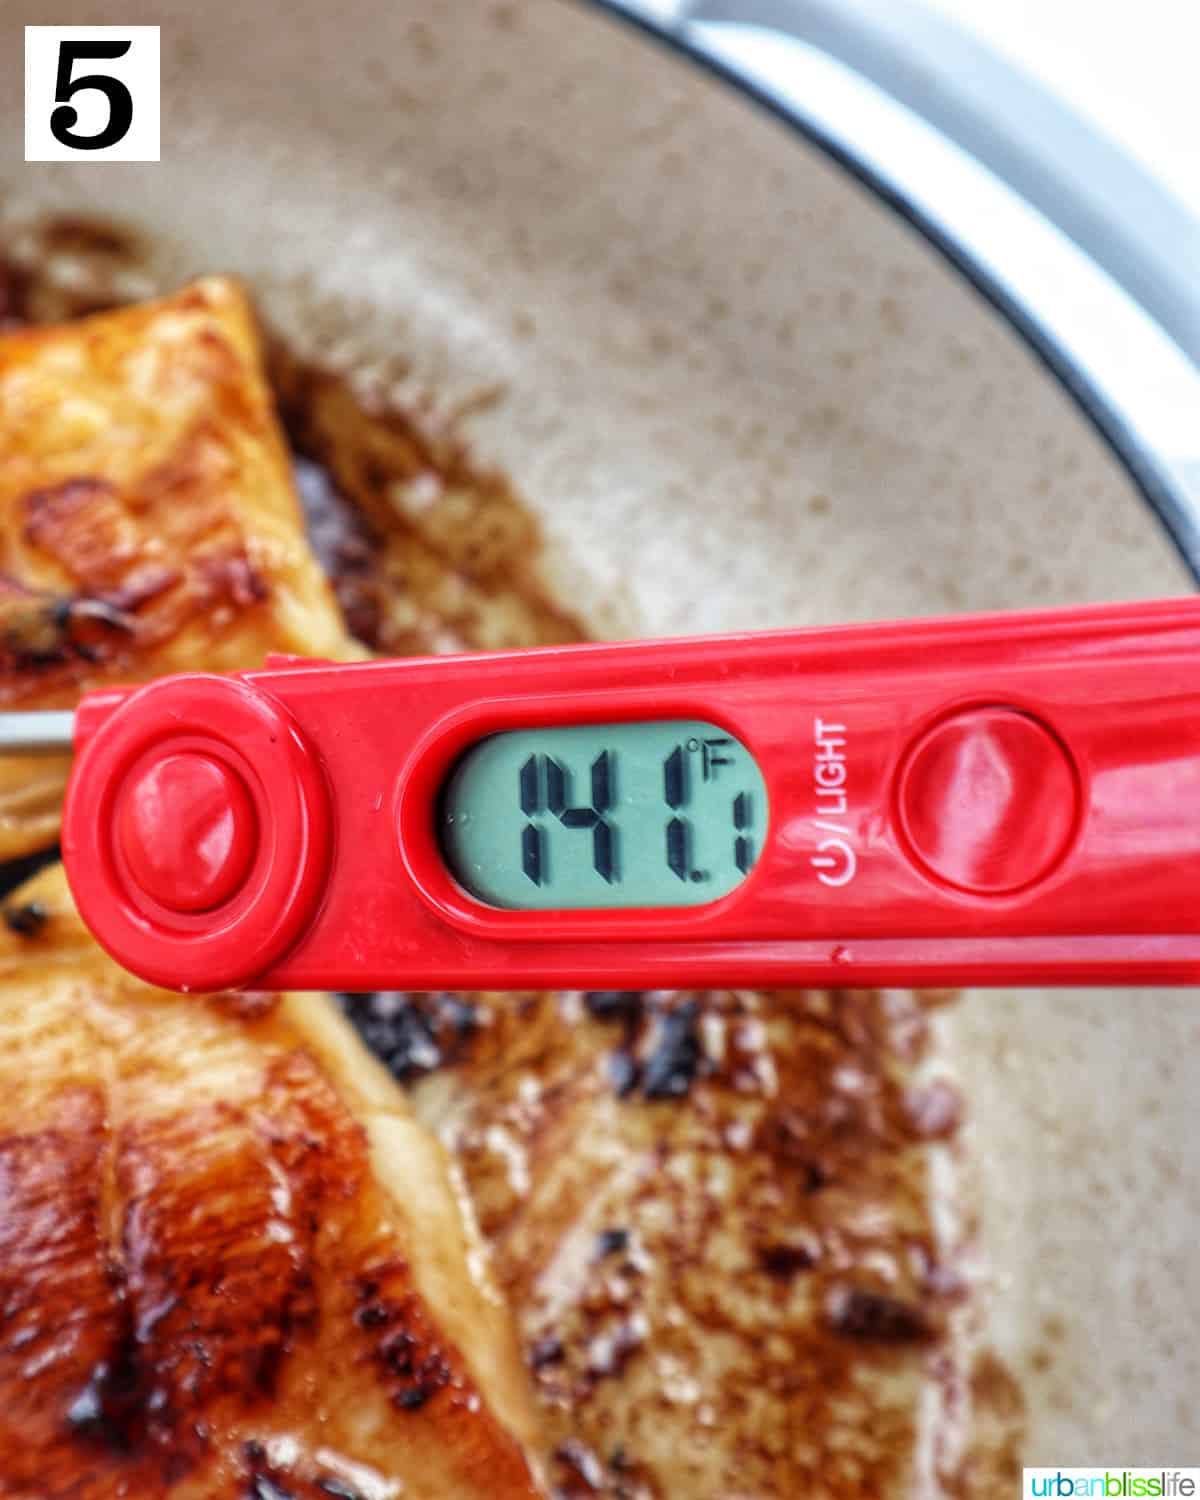 meat thermometer in a white fish showing 141 degrees.